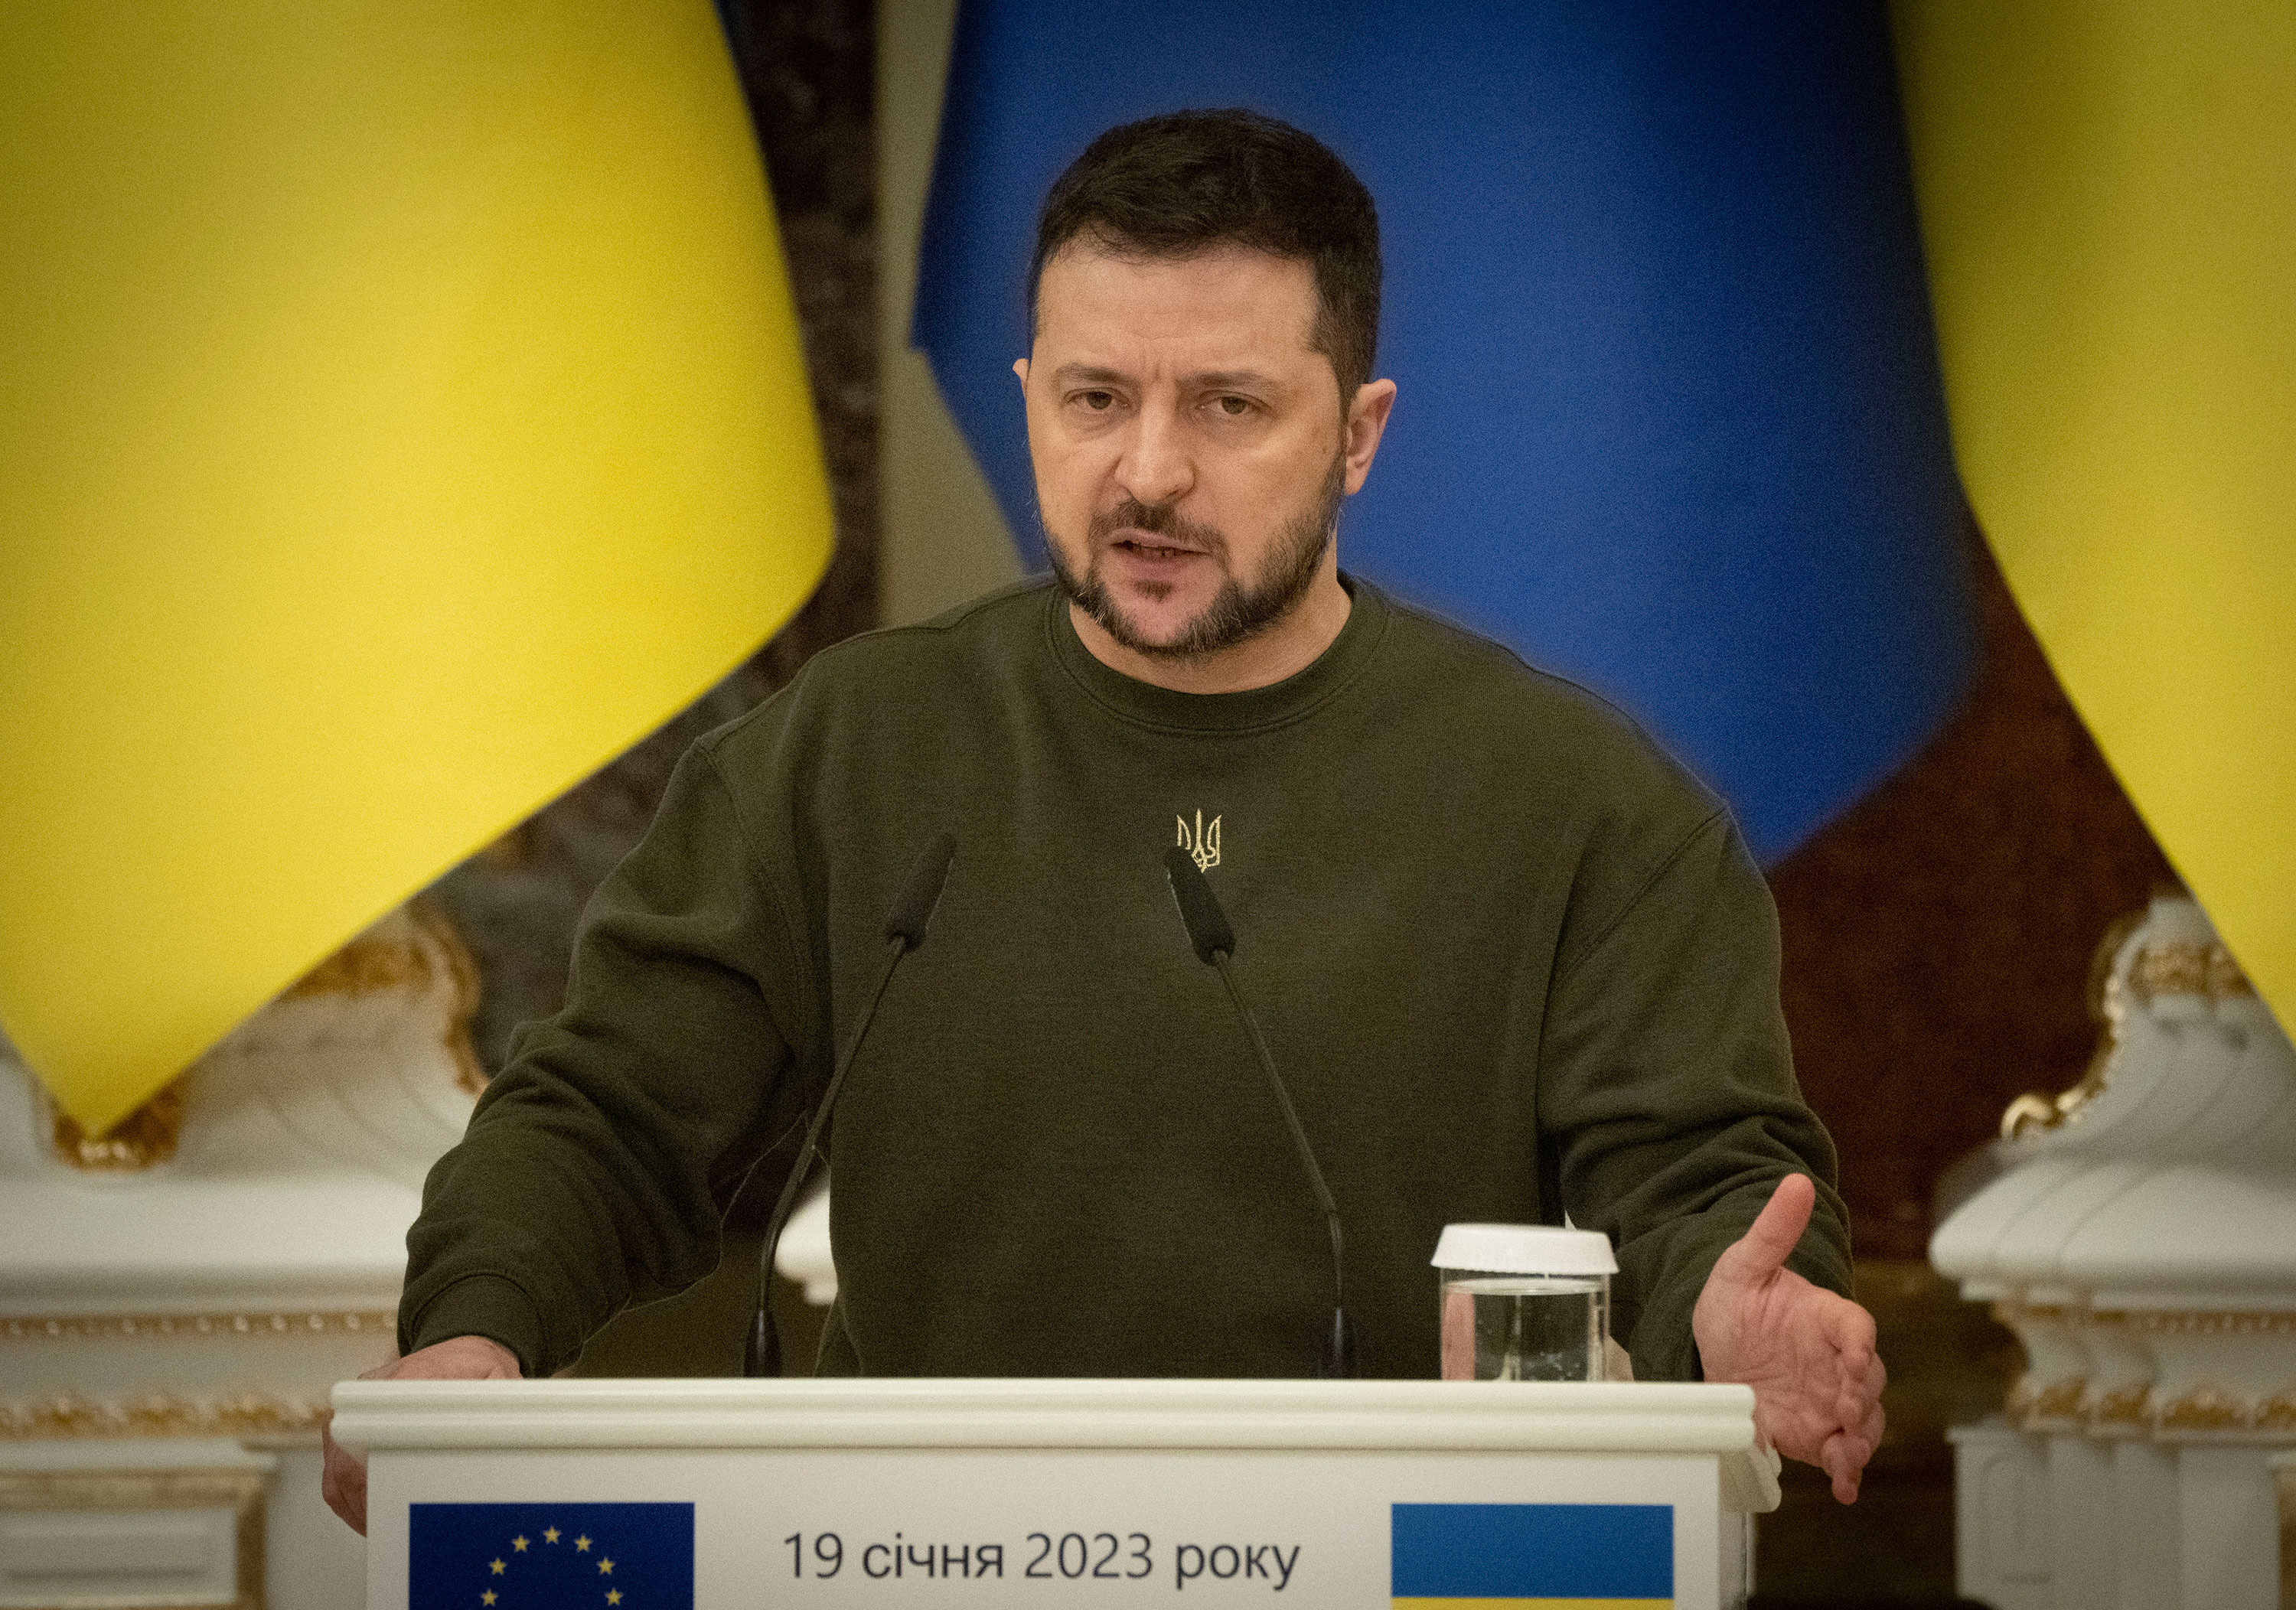 Ukrainian President Volodymyr Zelensky speaks during a news conference with European Council President Charles Michel after their meeting in Kyiv, Ukraine, on Thursday.